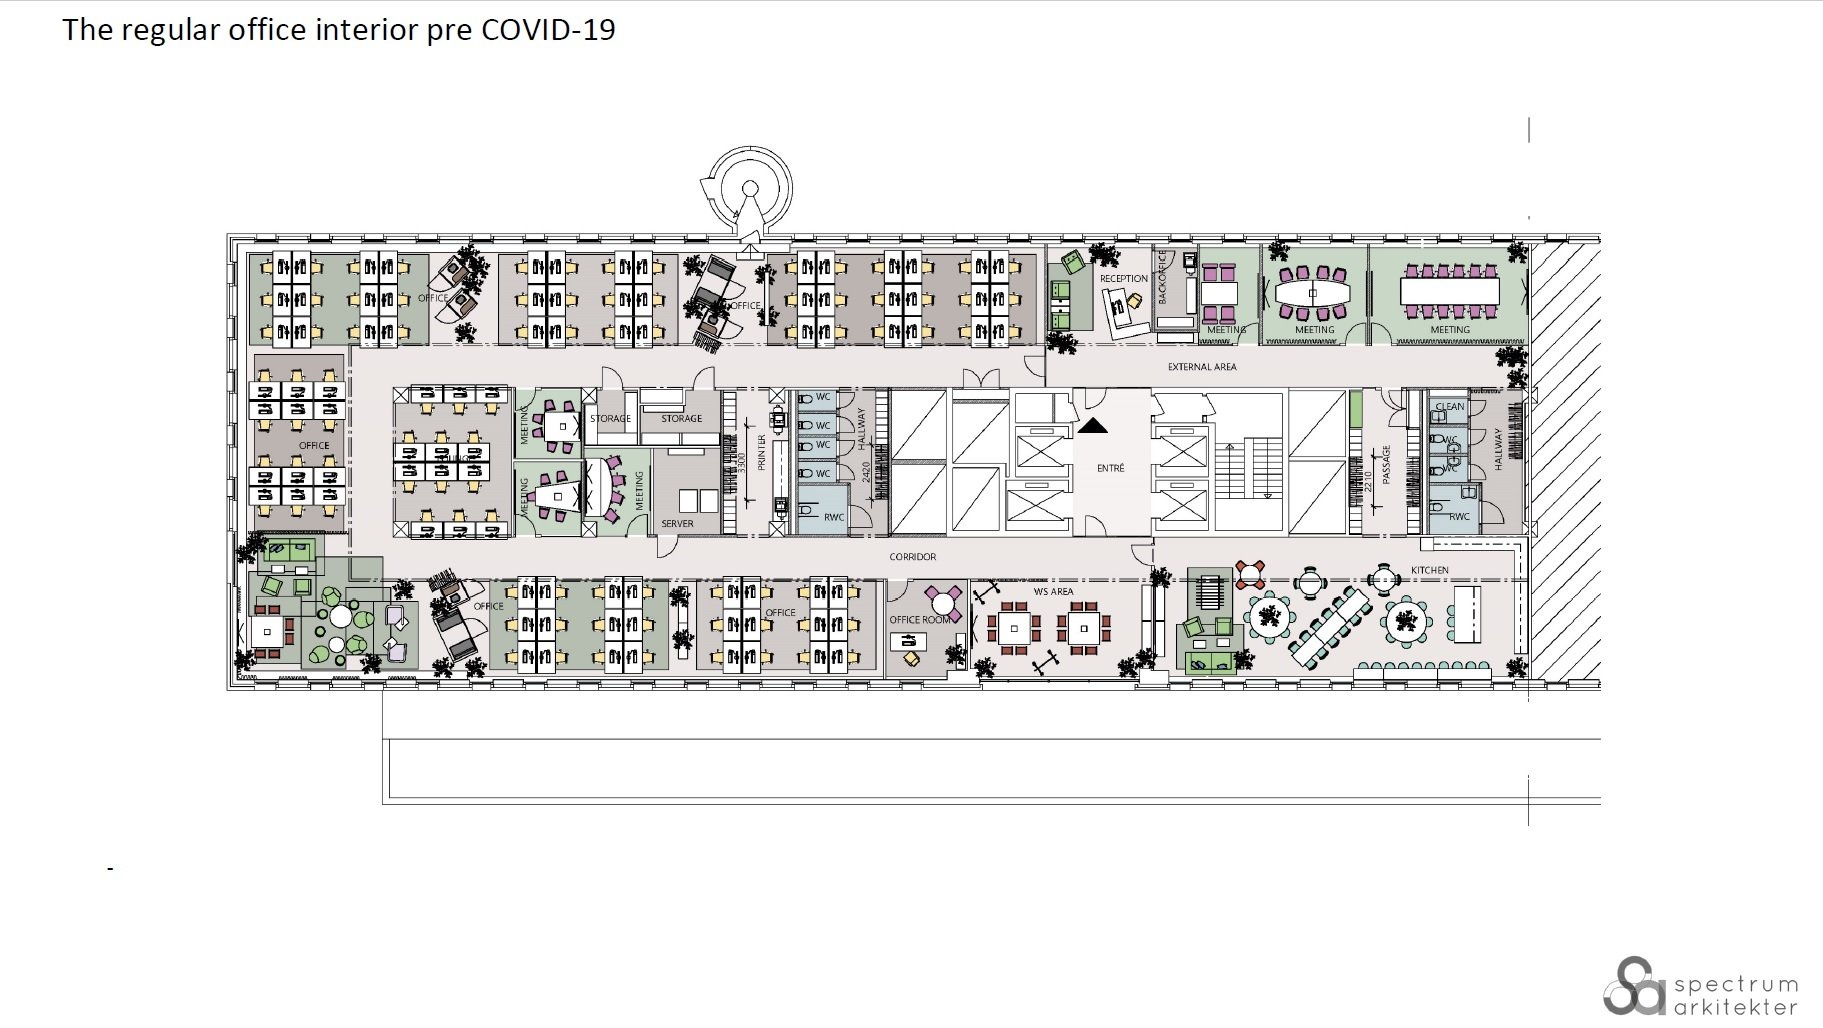 architect drawing of a workplace pre covid-19